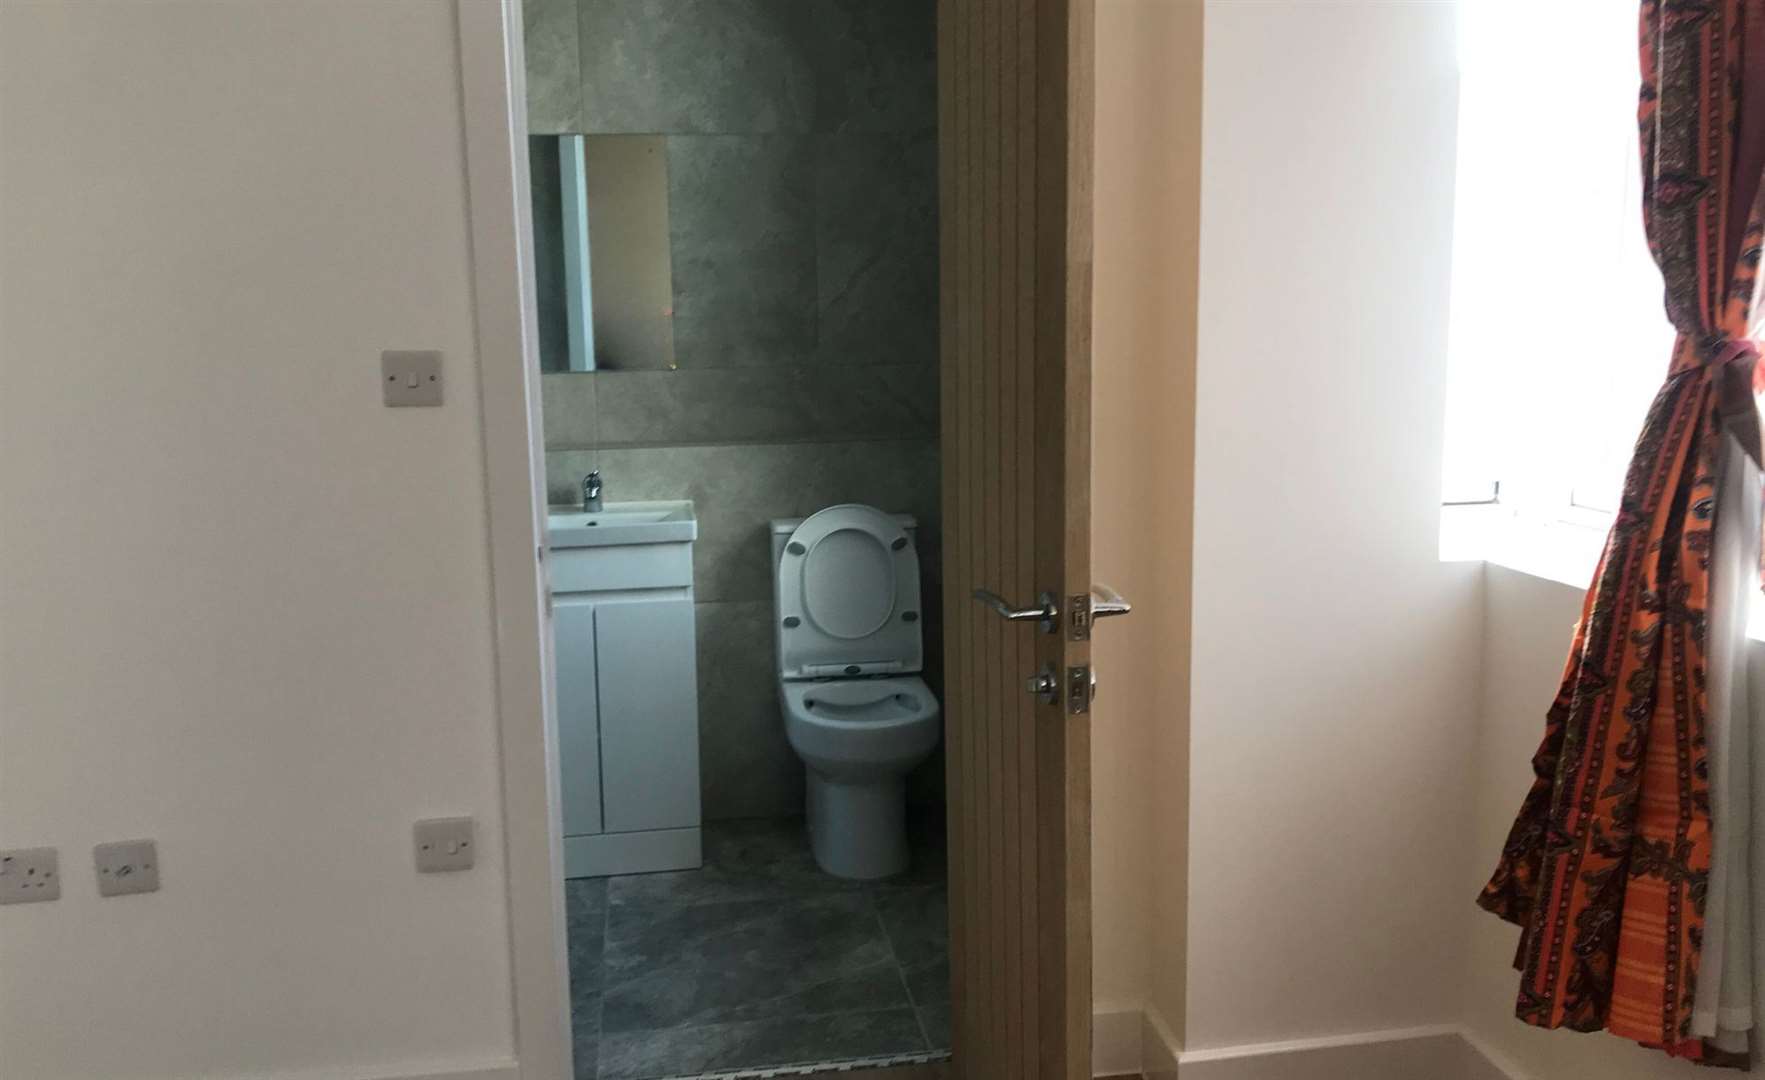 The bathroom in one of the new flats at Anchorage House